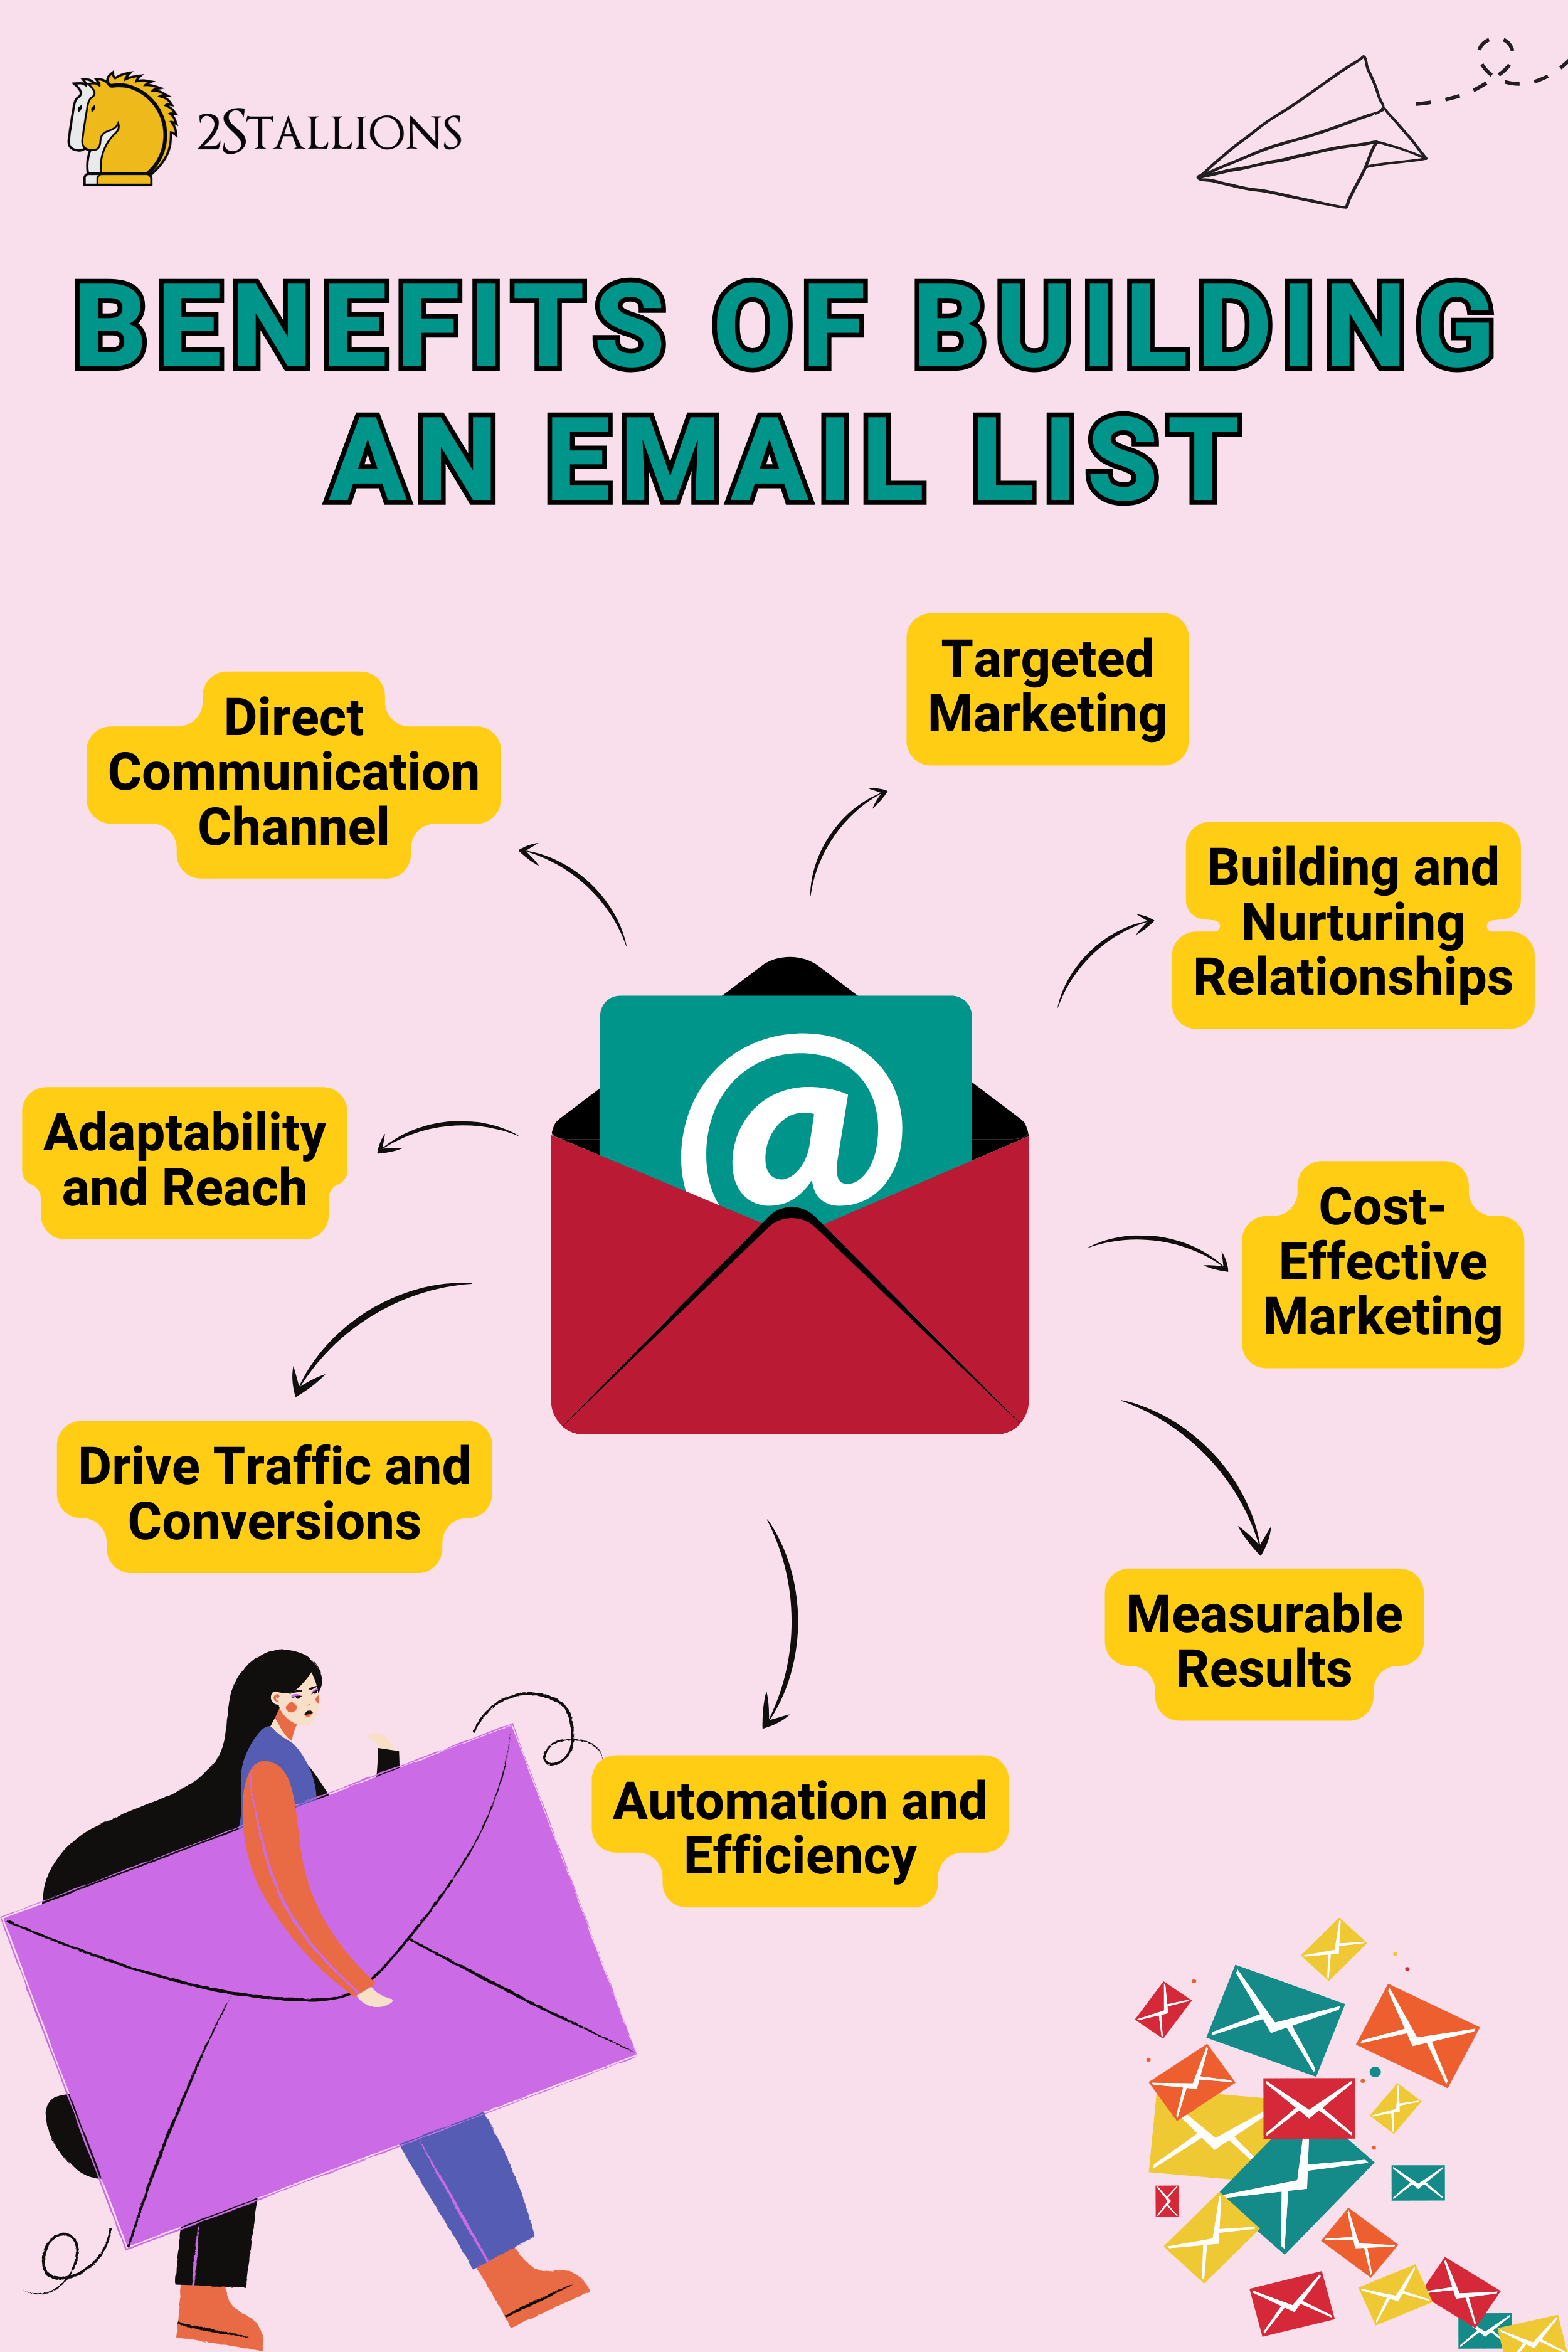 Benefits of Building an Email List | 2Stallions